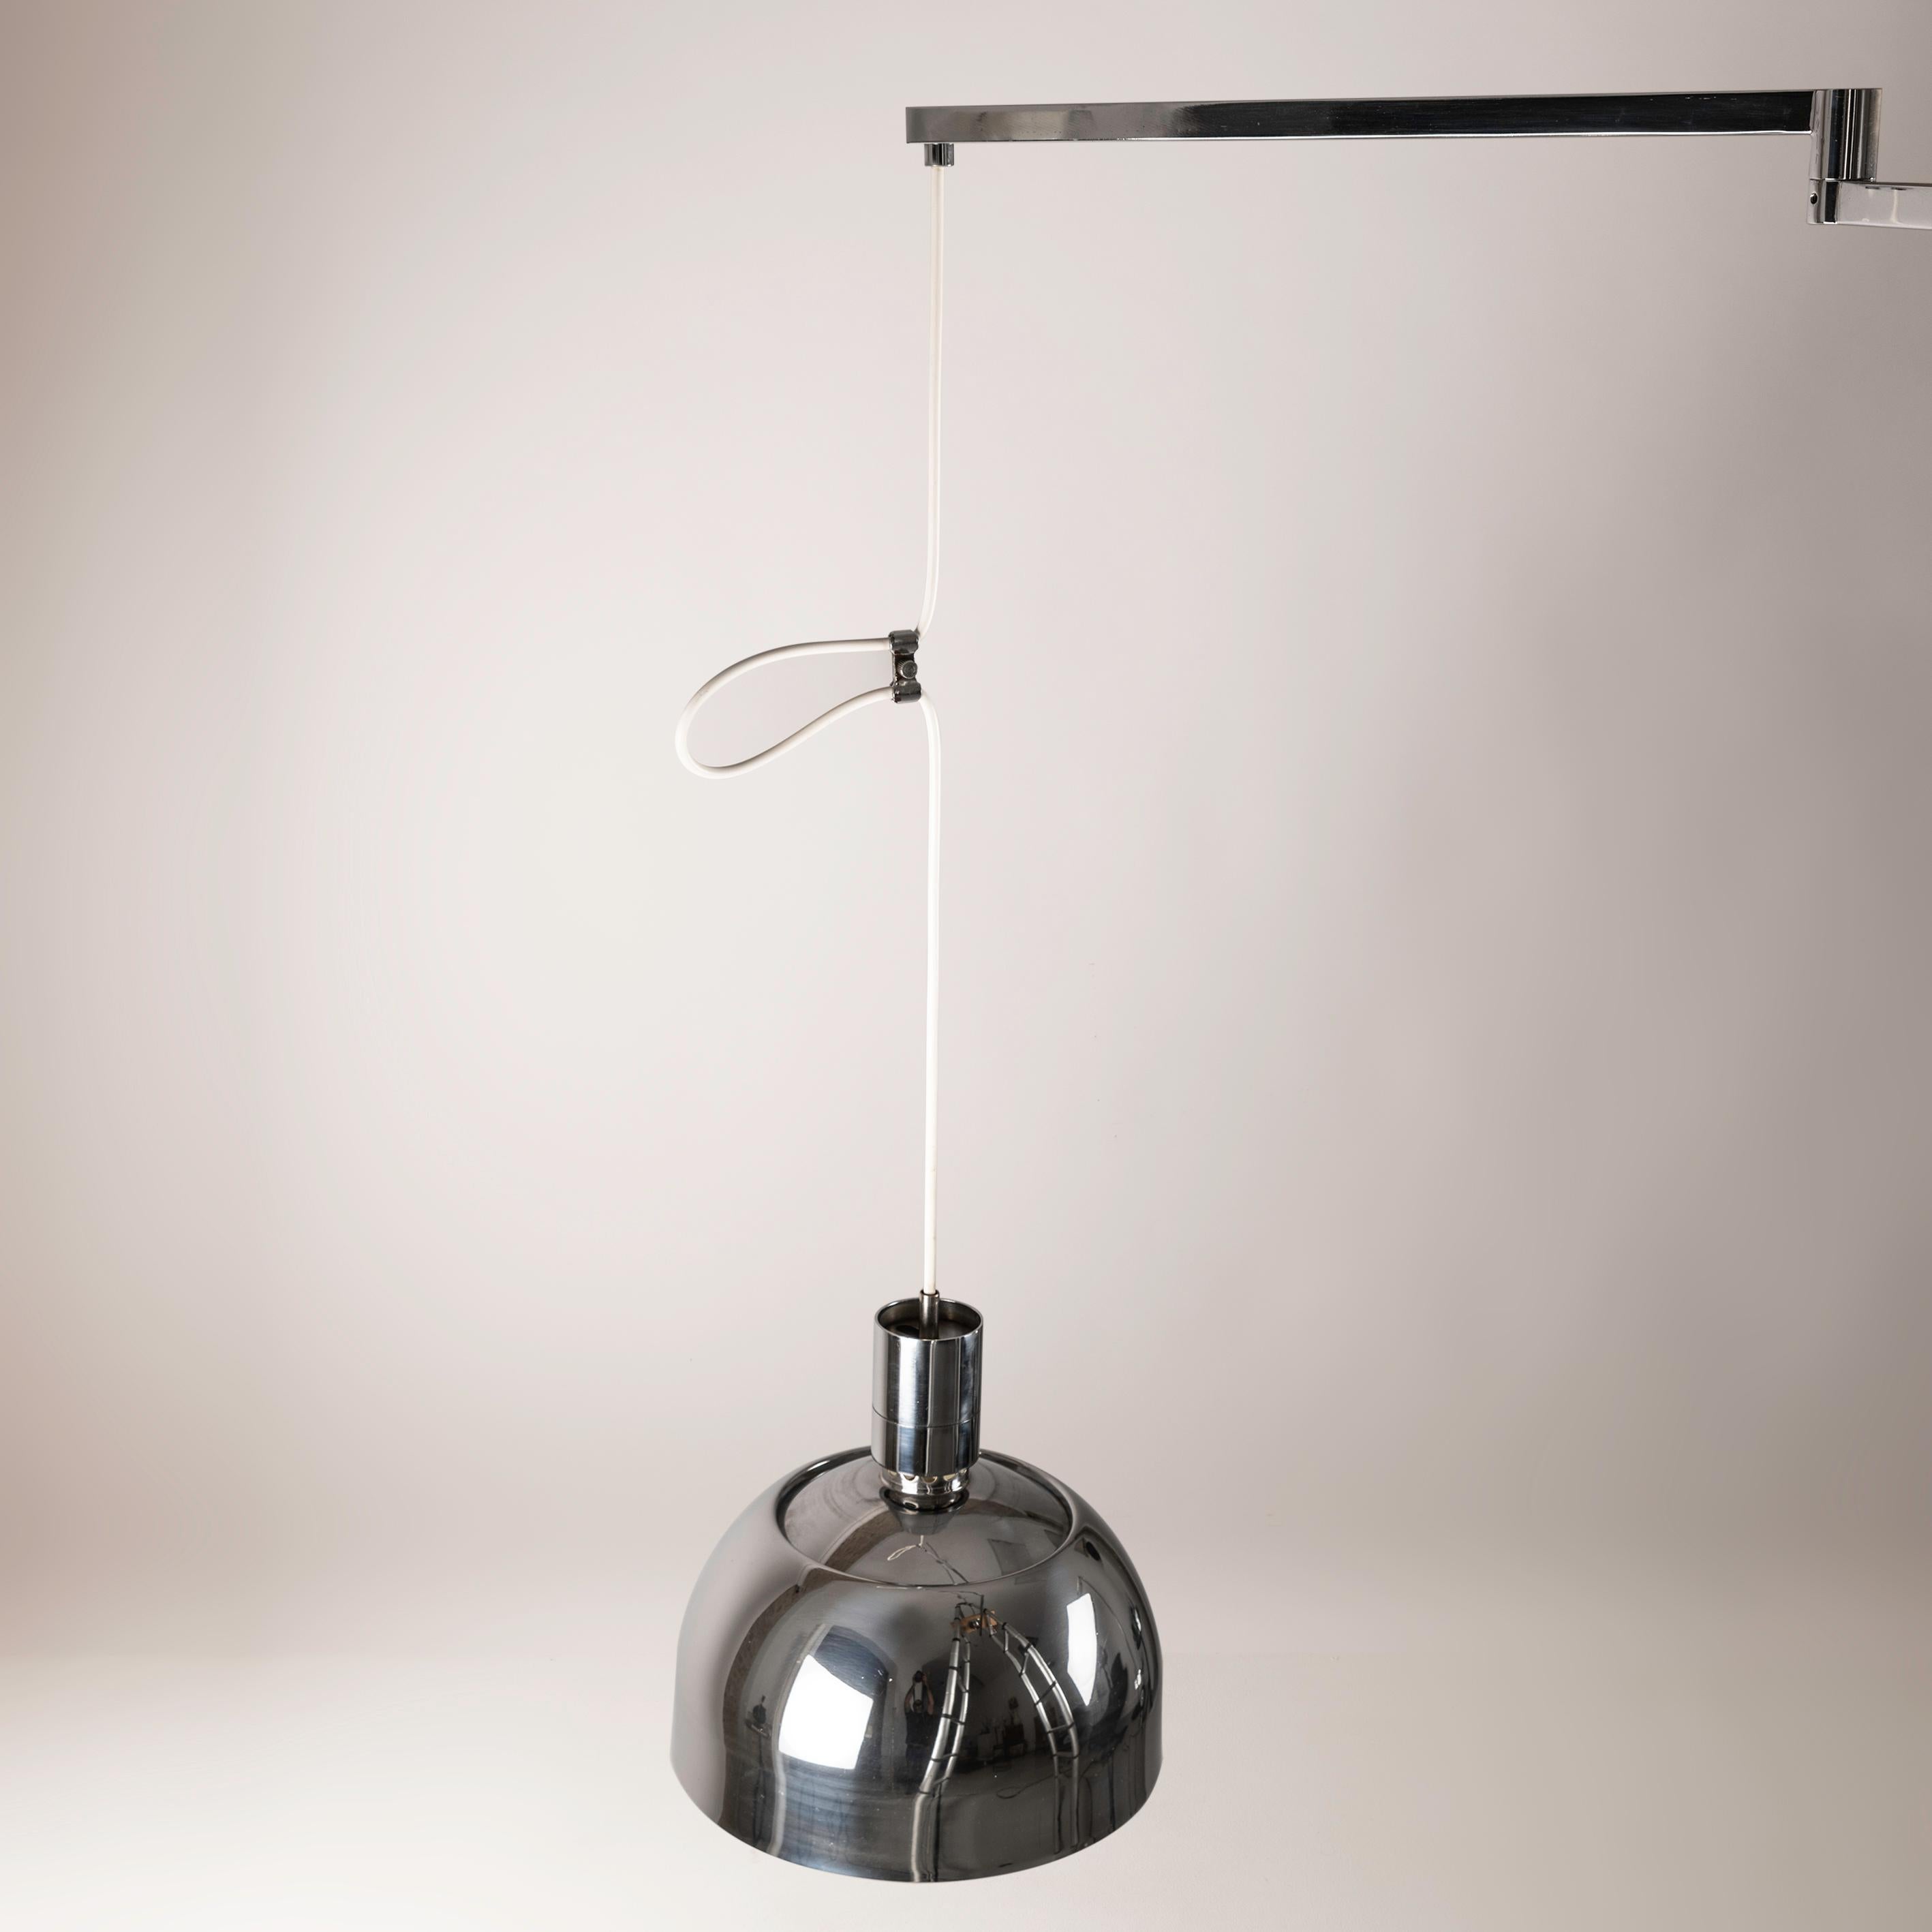 AM/AS Ceiling Lamp with Chromed Swing Arm by Franco Albini for Sirrah, 1960s For Sale 1